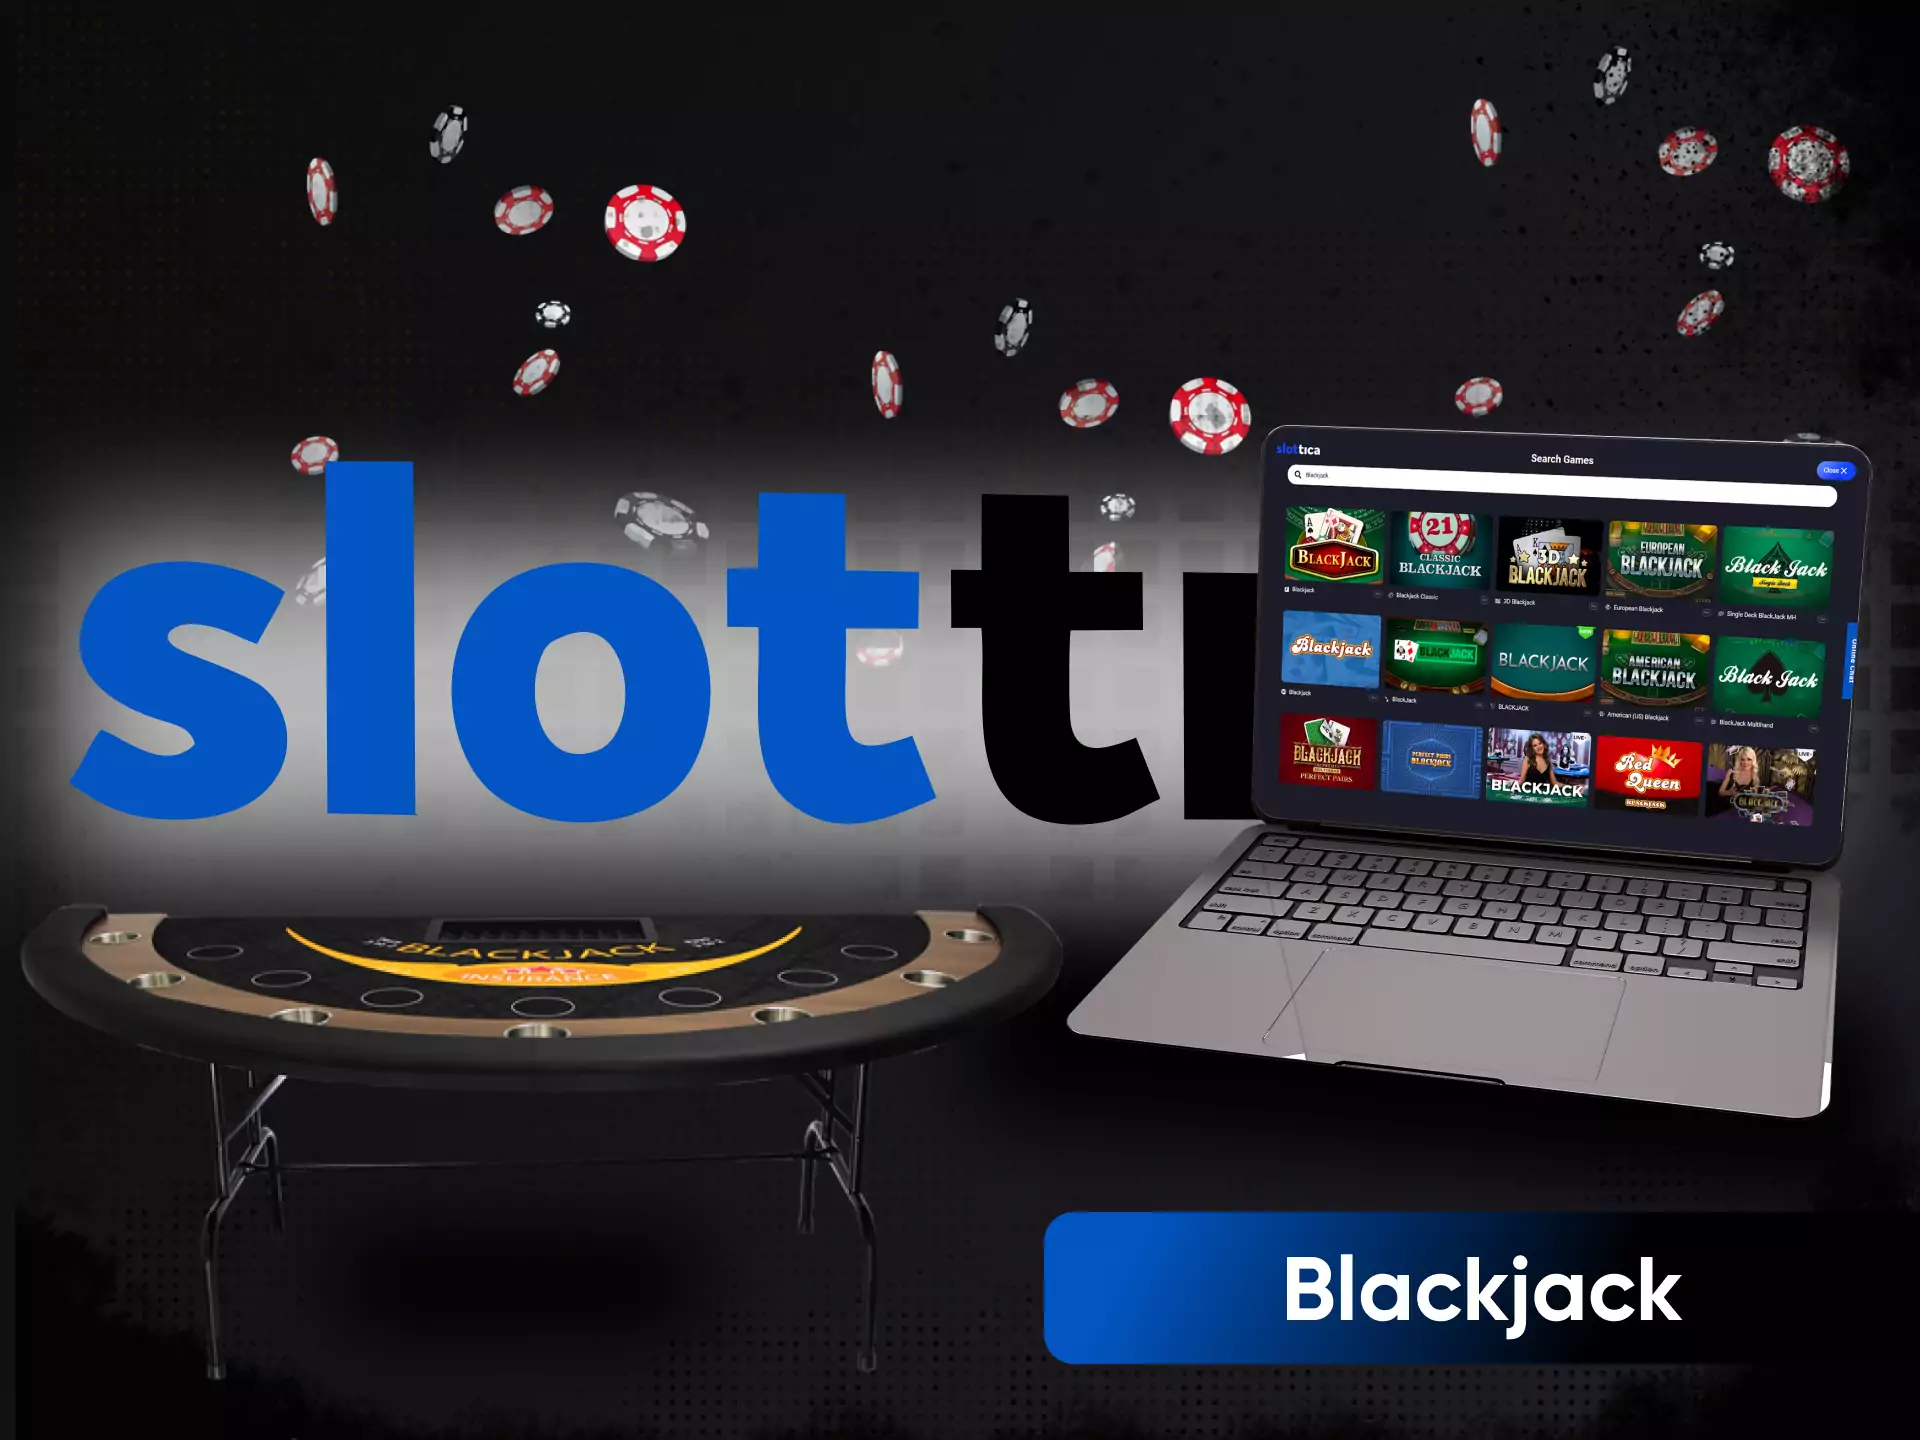 In the Slottica Casino, you can play blackjack anytime.